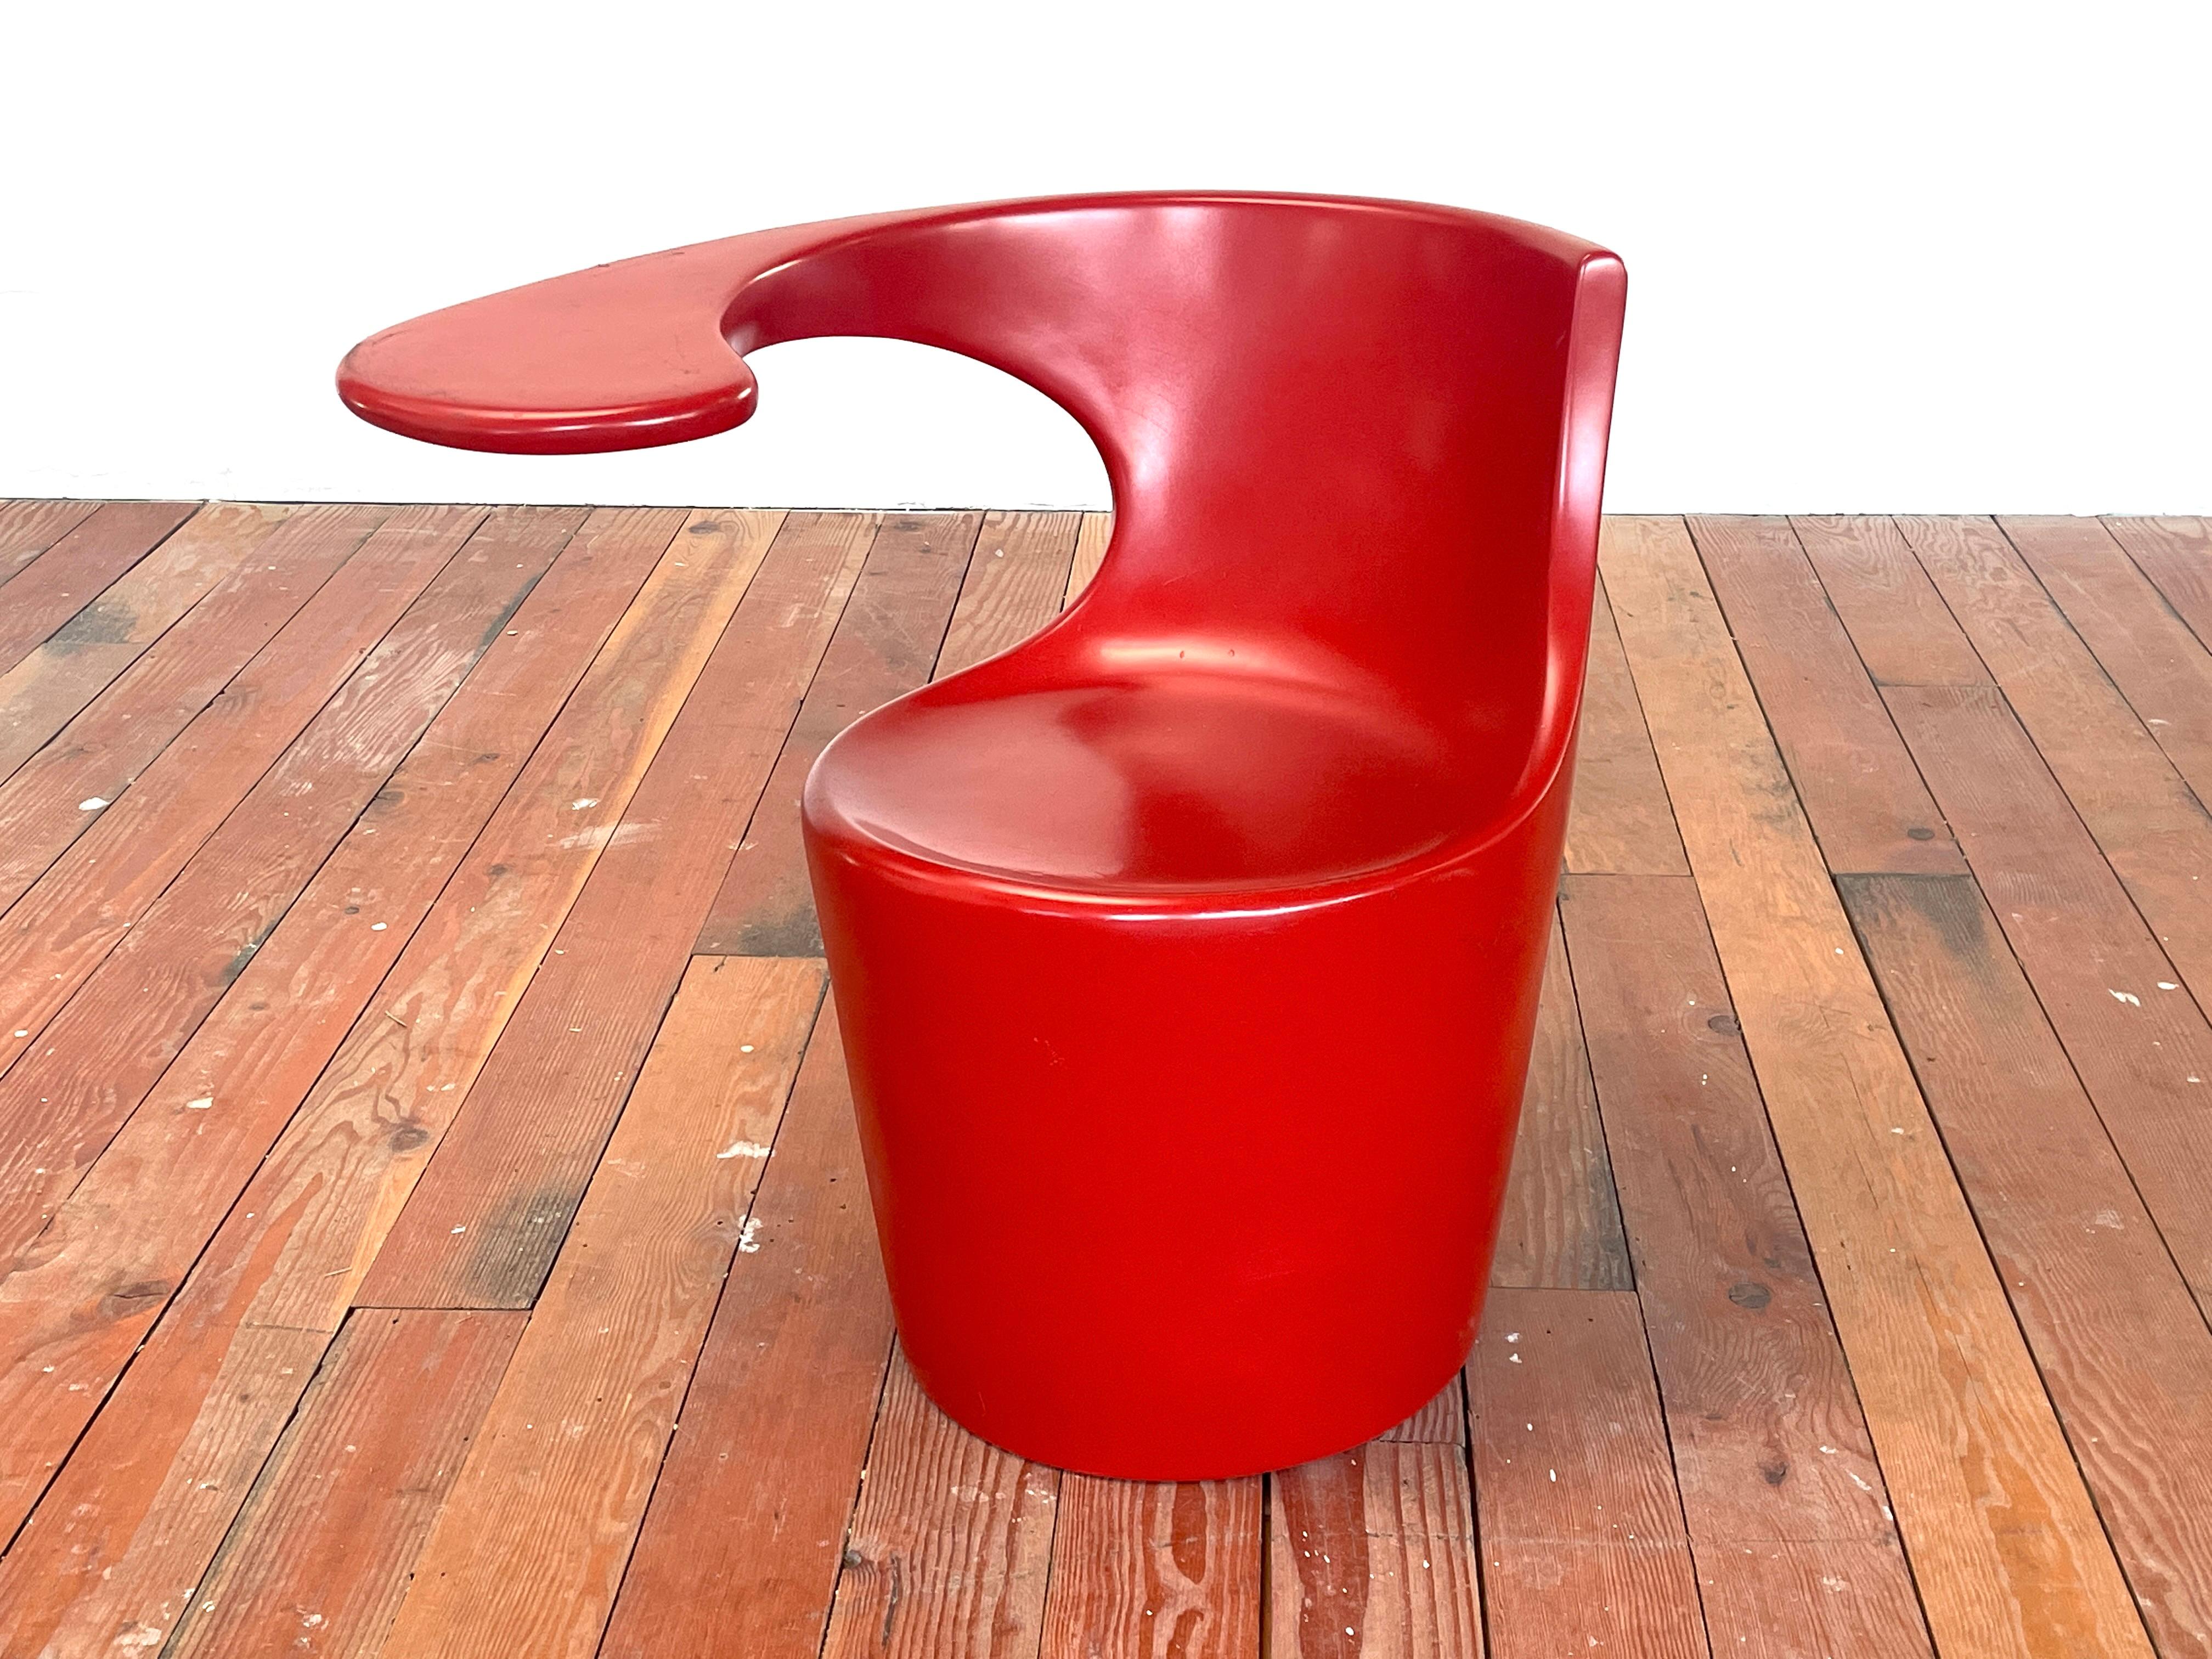 Sculptural Divina armchair with table top by J. B. for Felicerossi, Italy, designed 2002 n Italy 
Original red color with table top as part of the ergonomic shape. 
Created out of polyethylene - suitable for indoor / outdoor



